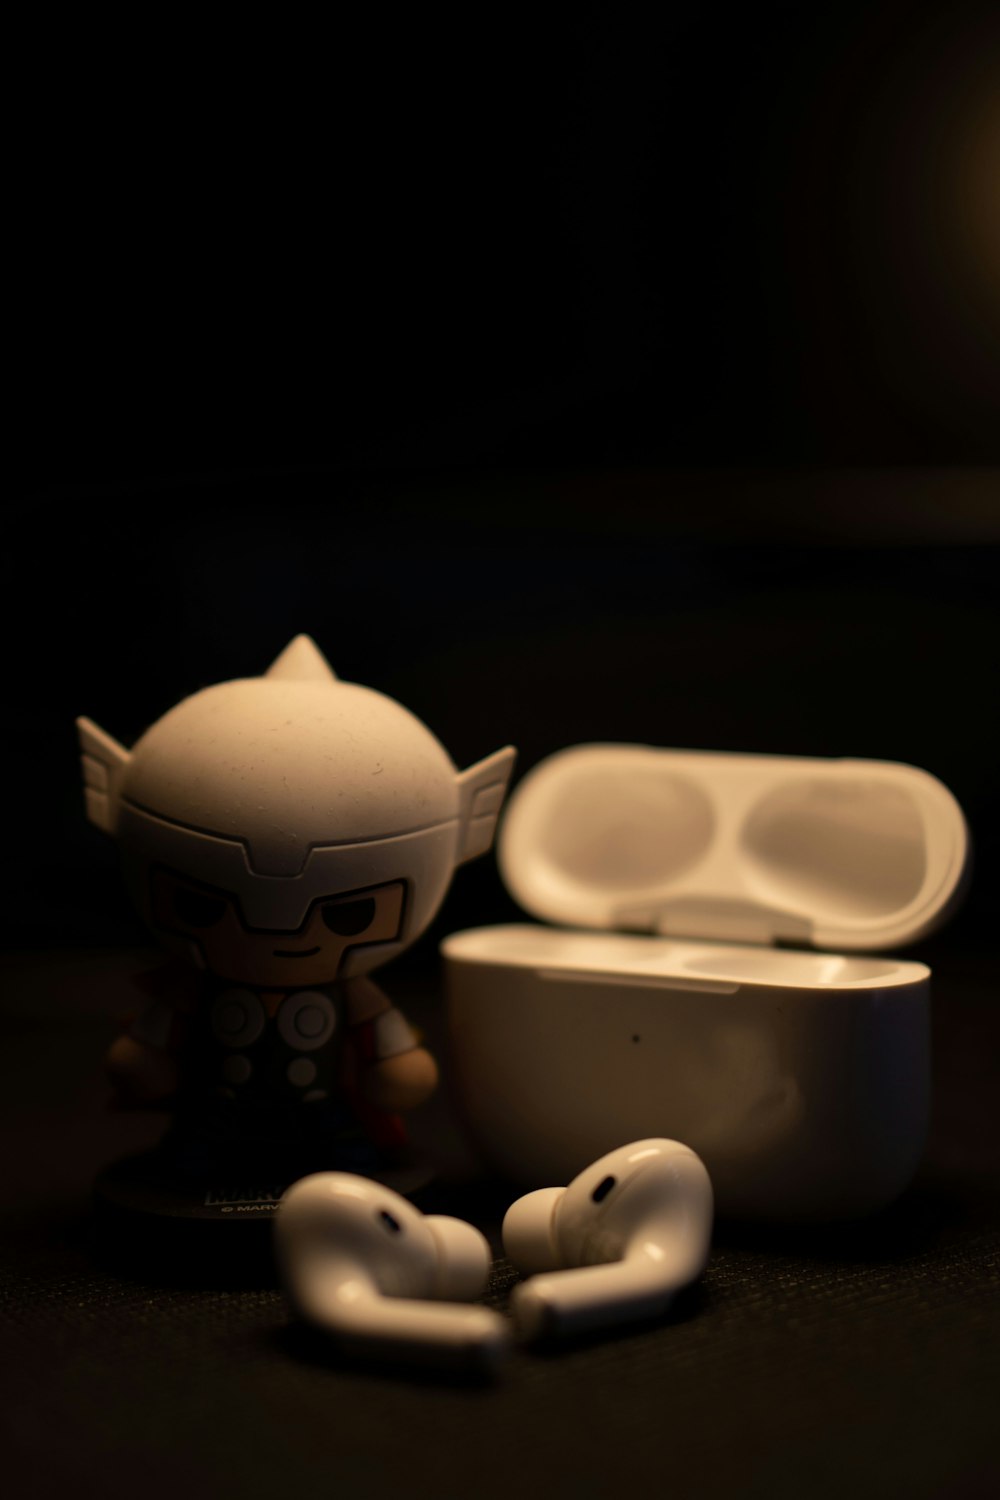 a toy figurine next to some white objects